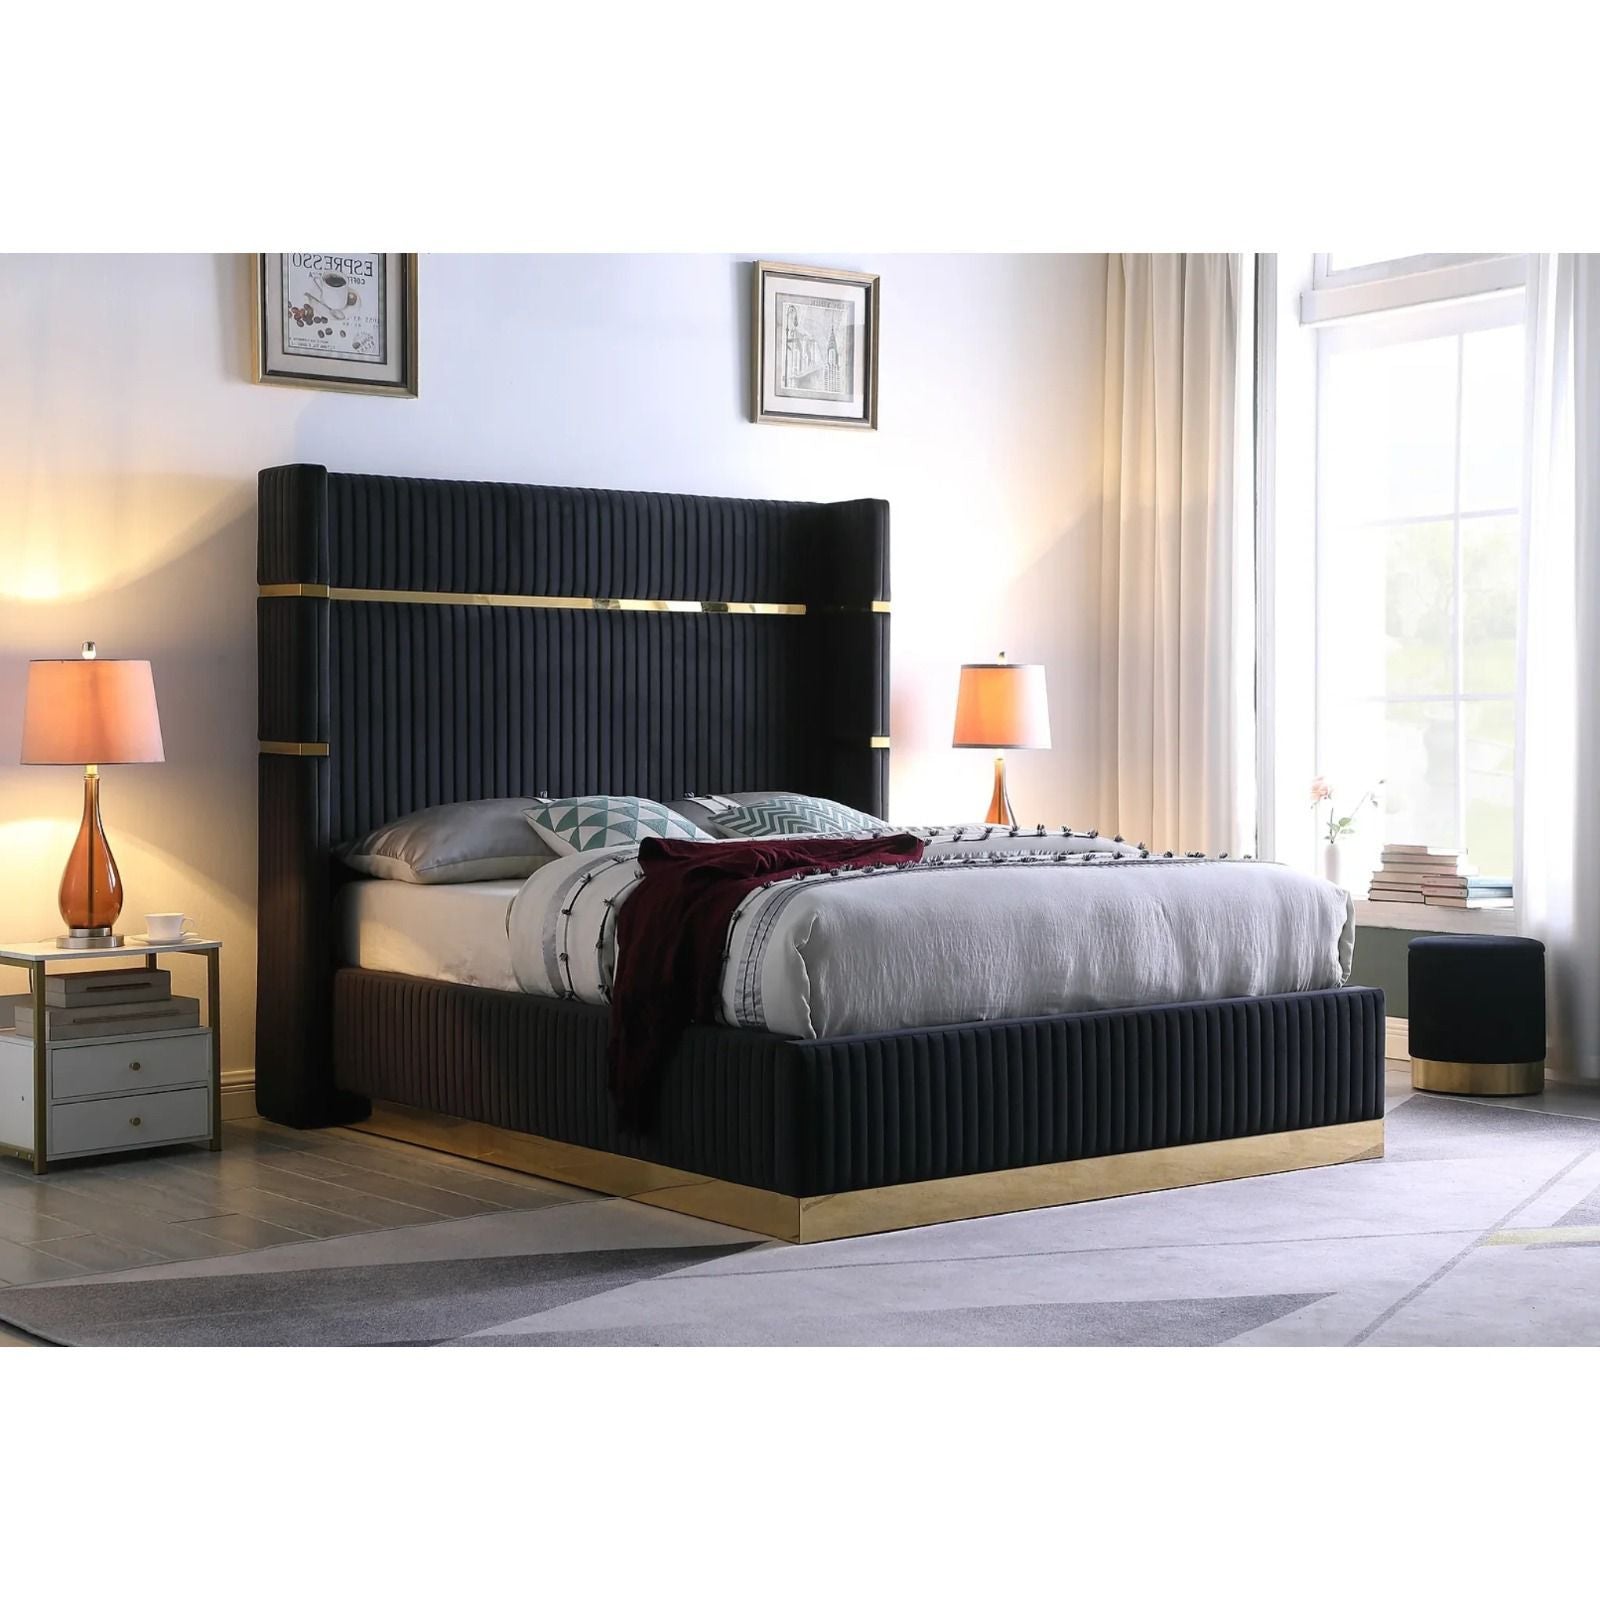 Aspen - Modern Platform Bed Finished With Fine Lines & Gold Accents